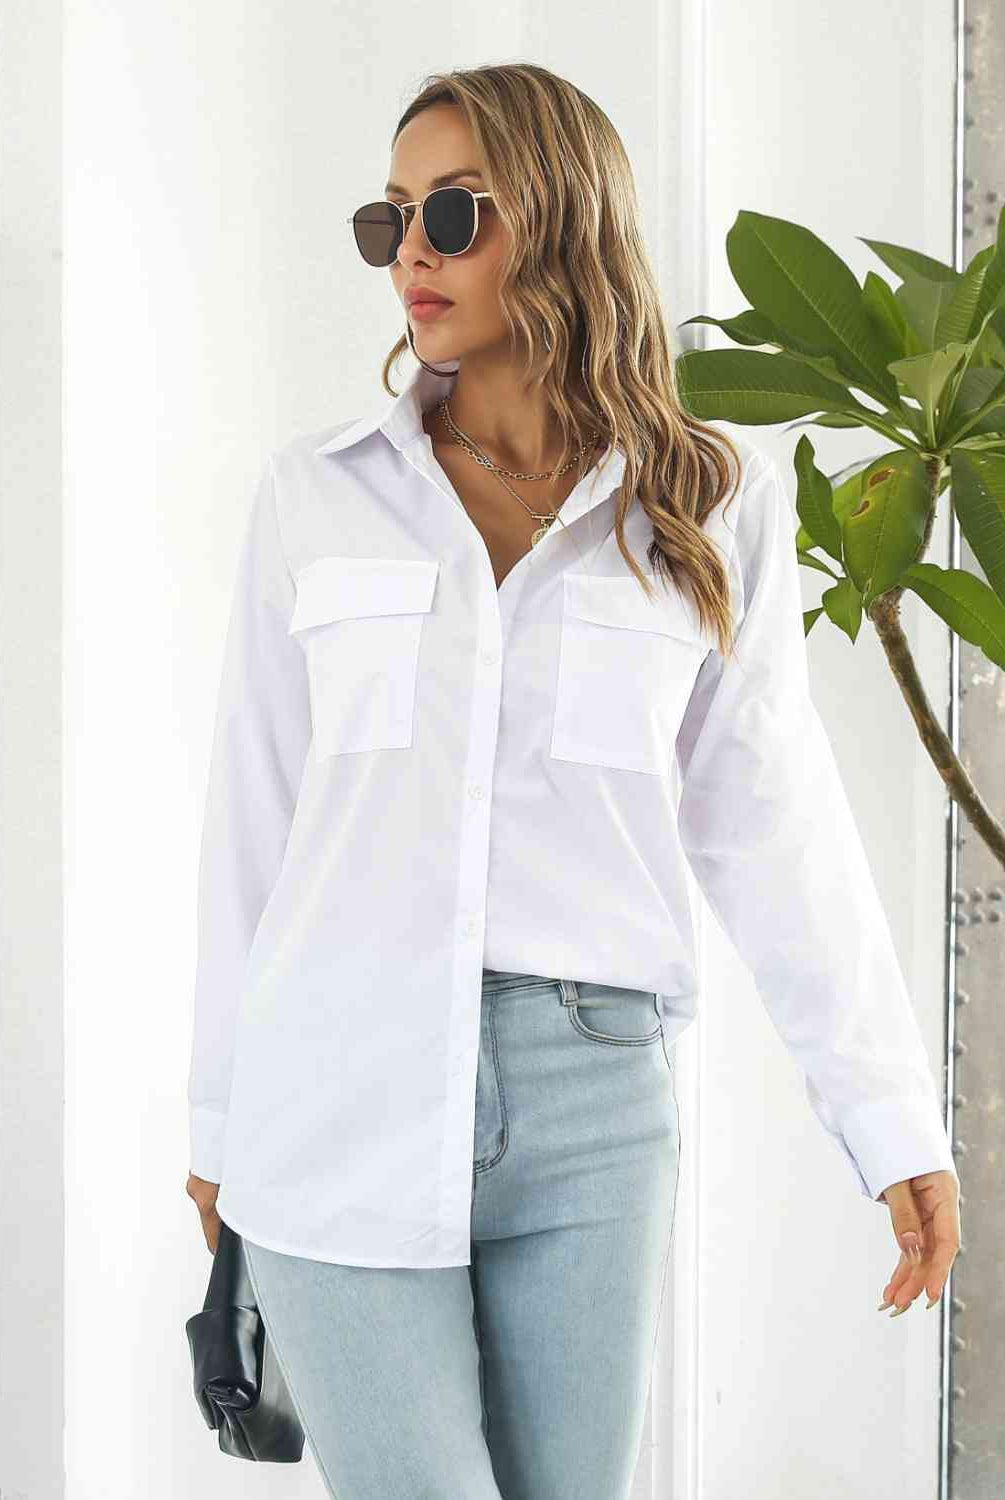 Collared Neck Buttoned Shirt with Pockets - GemThreads Boutique Collared Neck Buttoned Shirt with Pockets